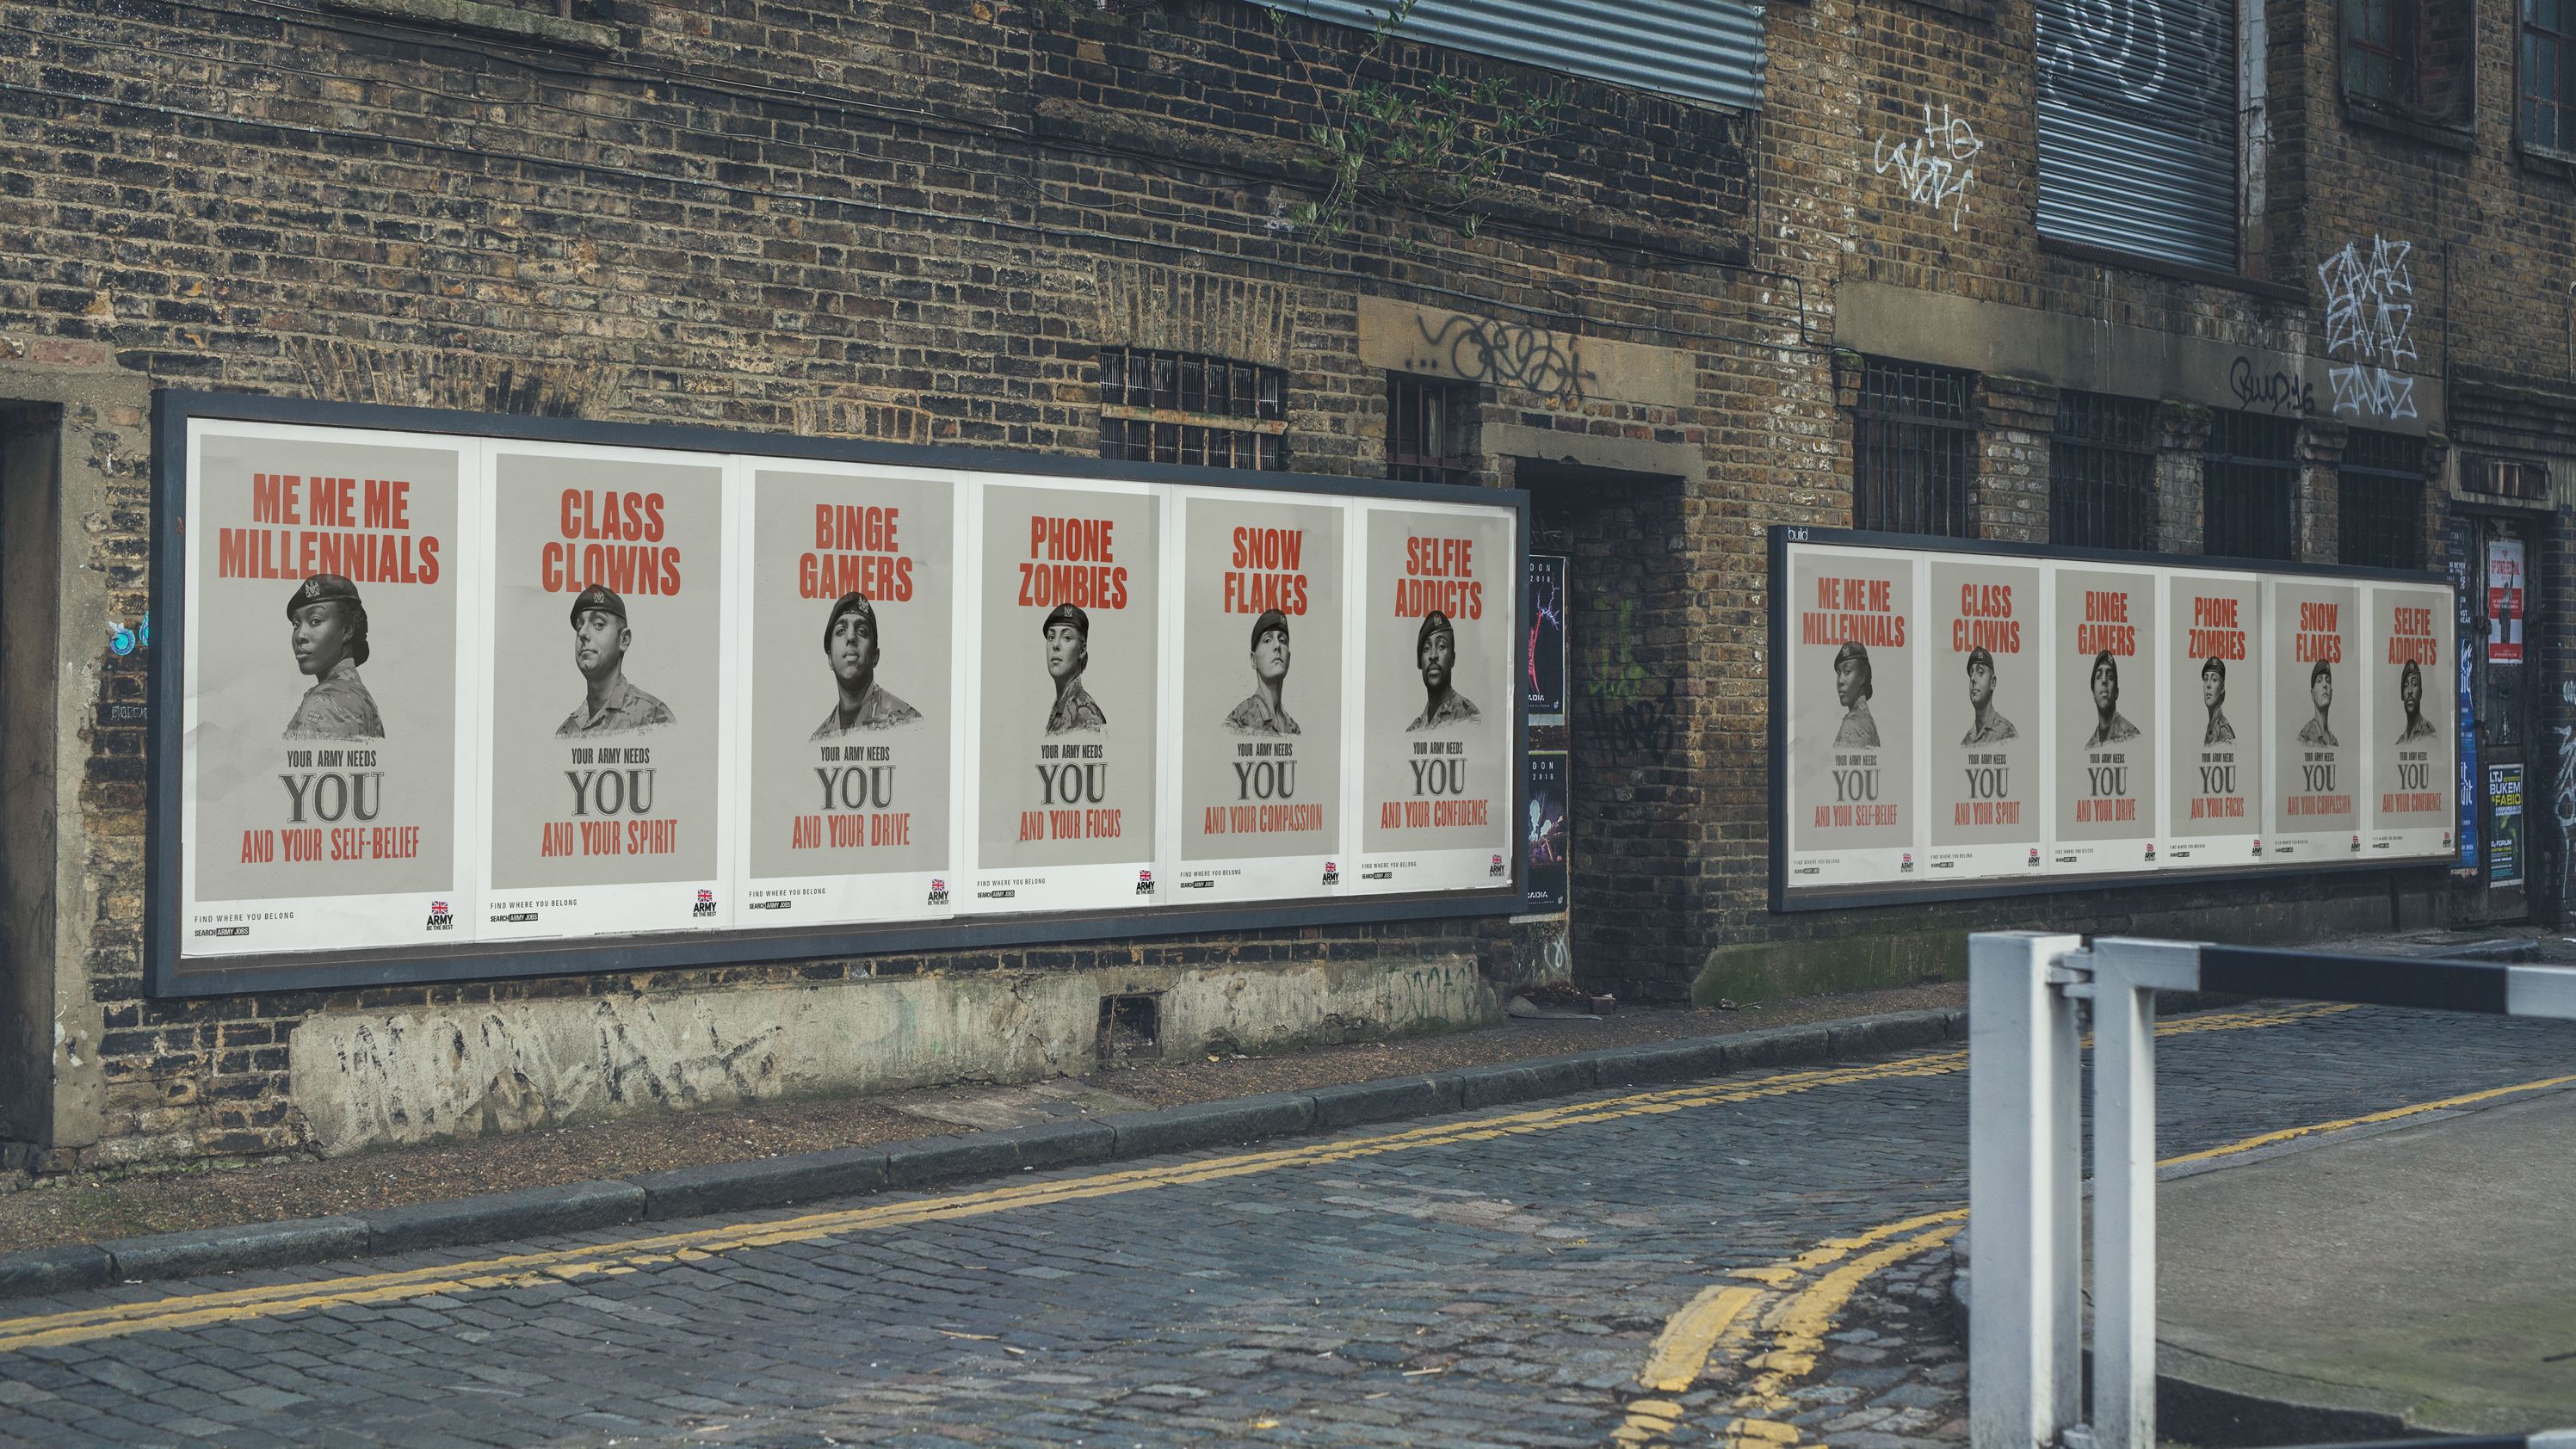 The British Army campaign features posters of soldiers with stereotype labels.